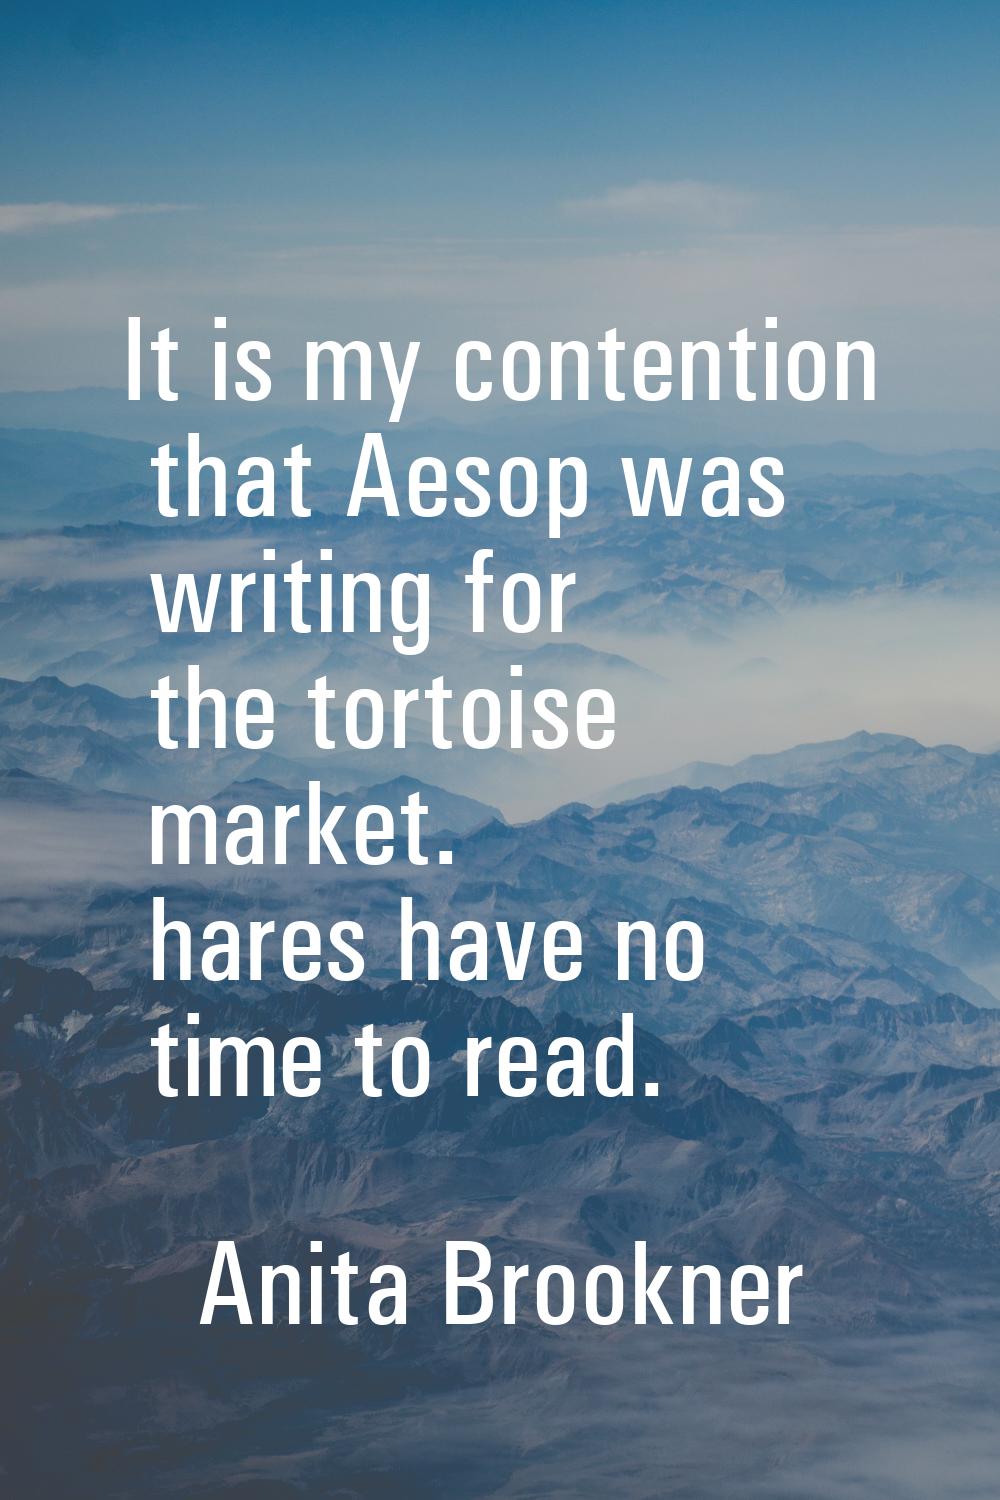 It is my contention that Aesop was writing for the tortoise market. hares have no time to read.